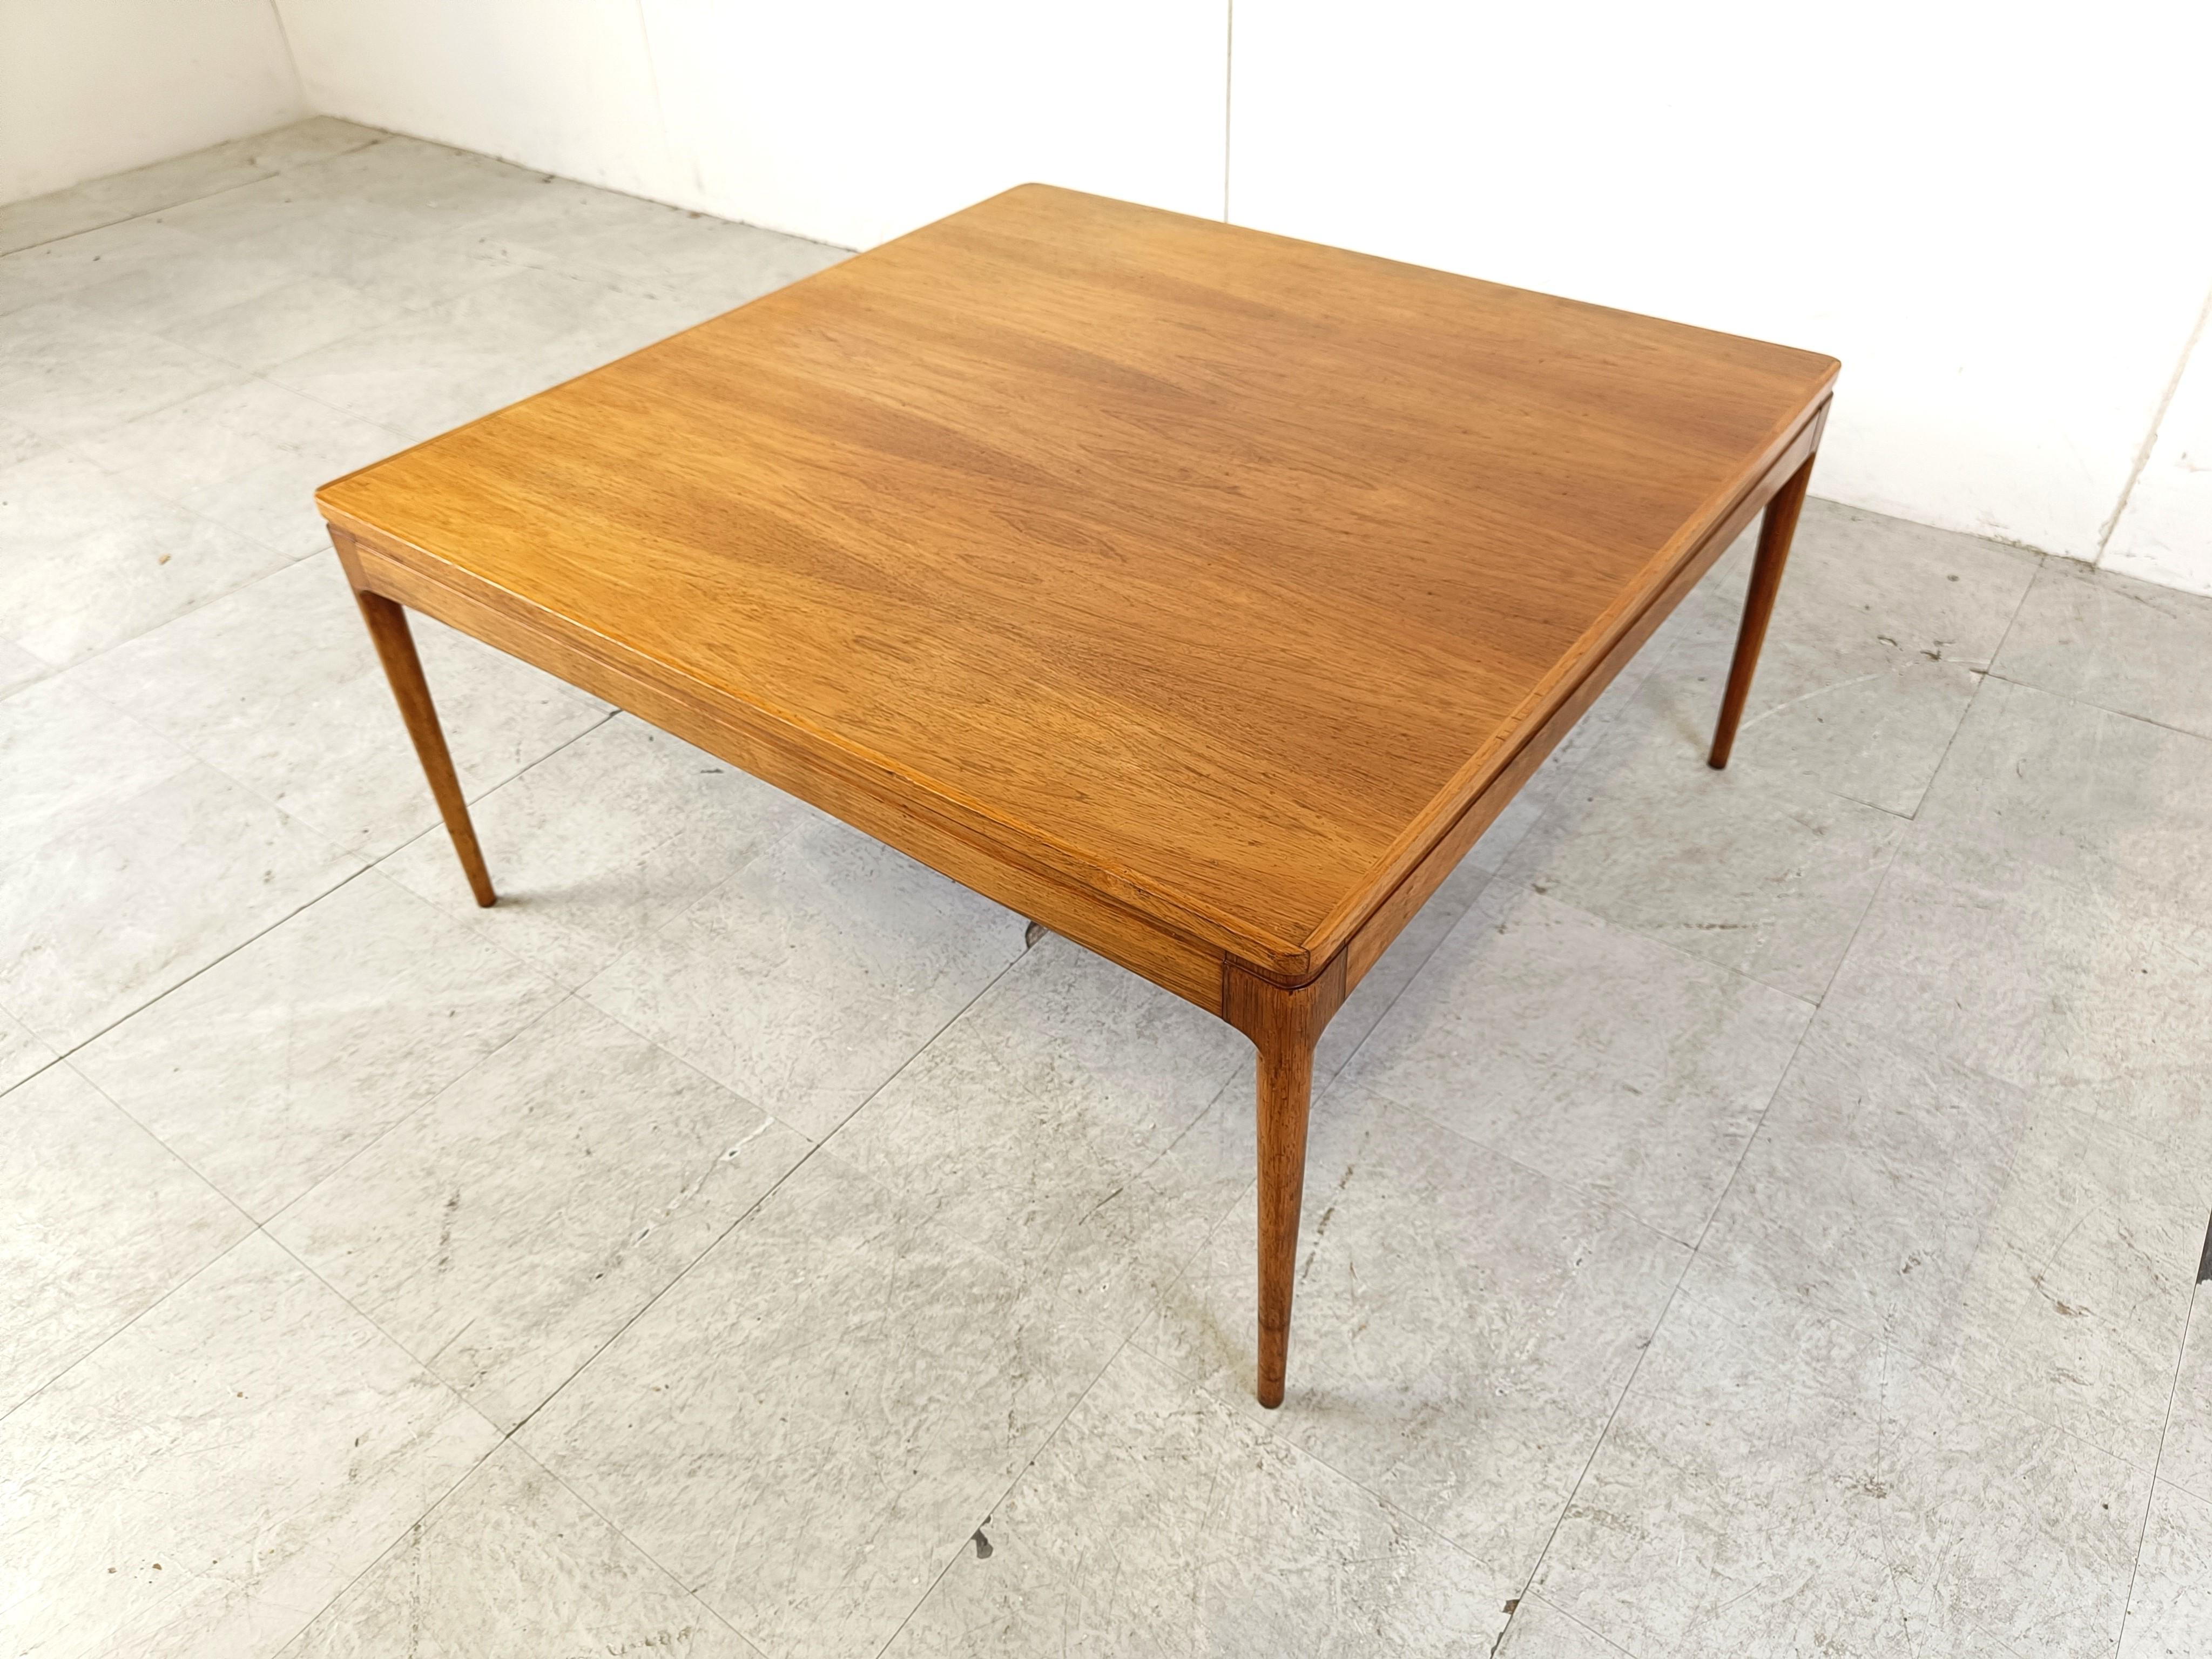 Mid century modern coffee table designed by Ole Wasnscher for AJ Iversen made from teak.

Beautifully crafted crame in very good condition

Very elegant scandinavian design piece.

1950s - Denmark

Dimensions:
Height: 44cm/17.32